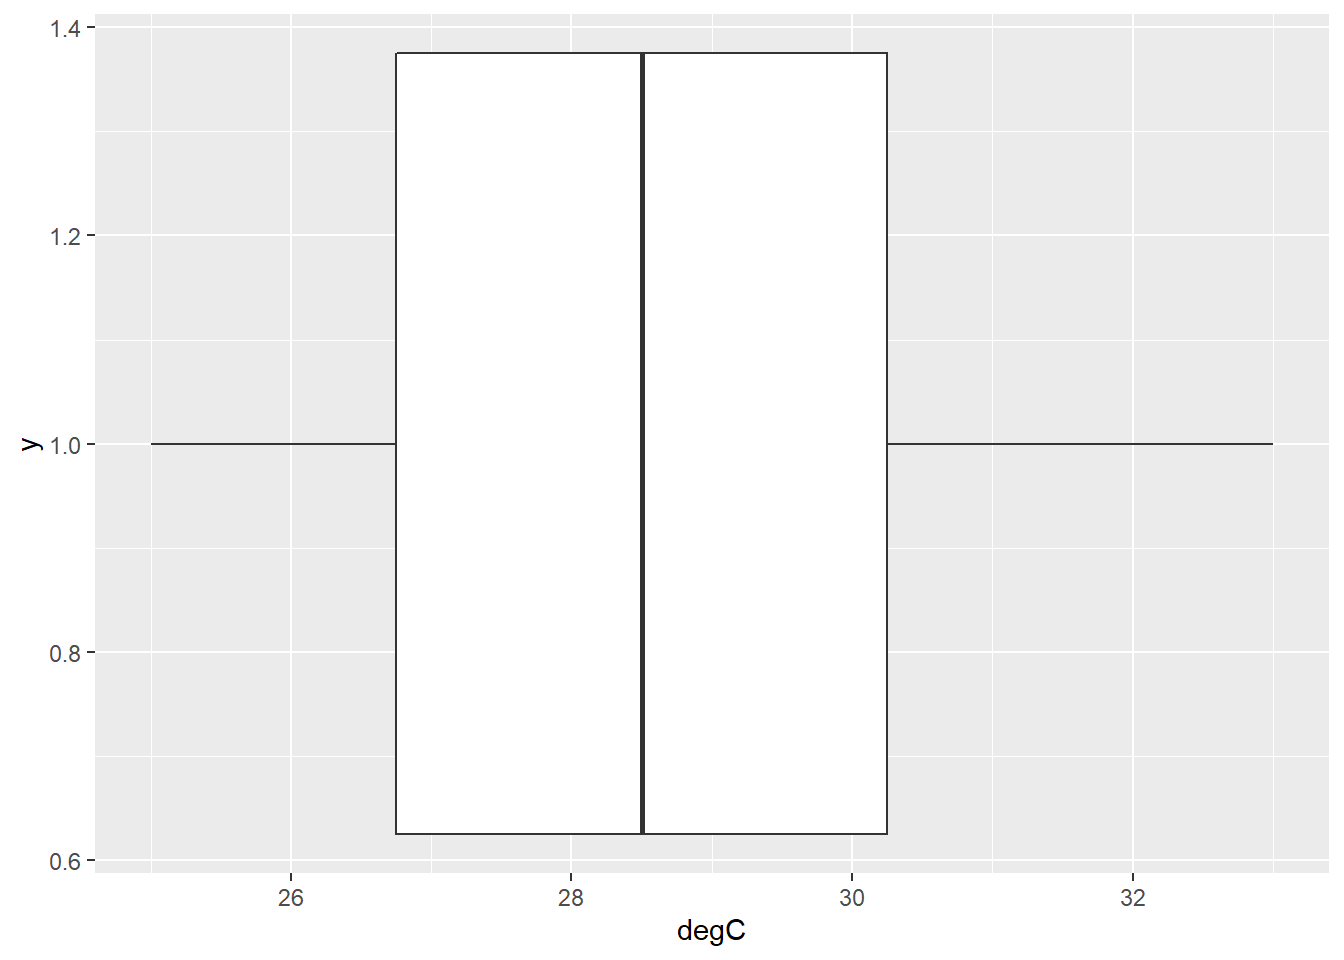 Box plot showing the distribution of temperature guesses around the true temperature of 28 degrees.